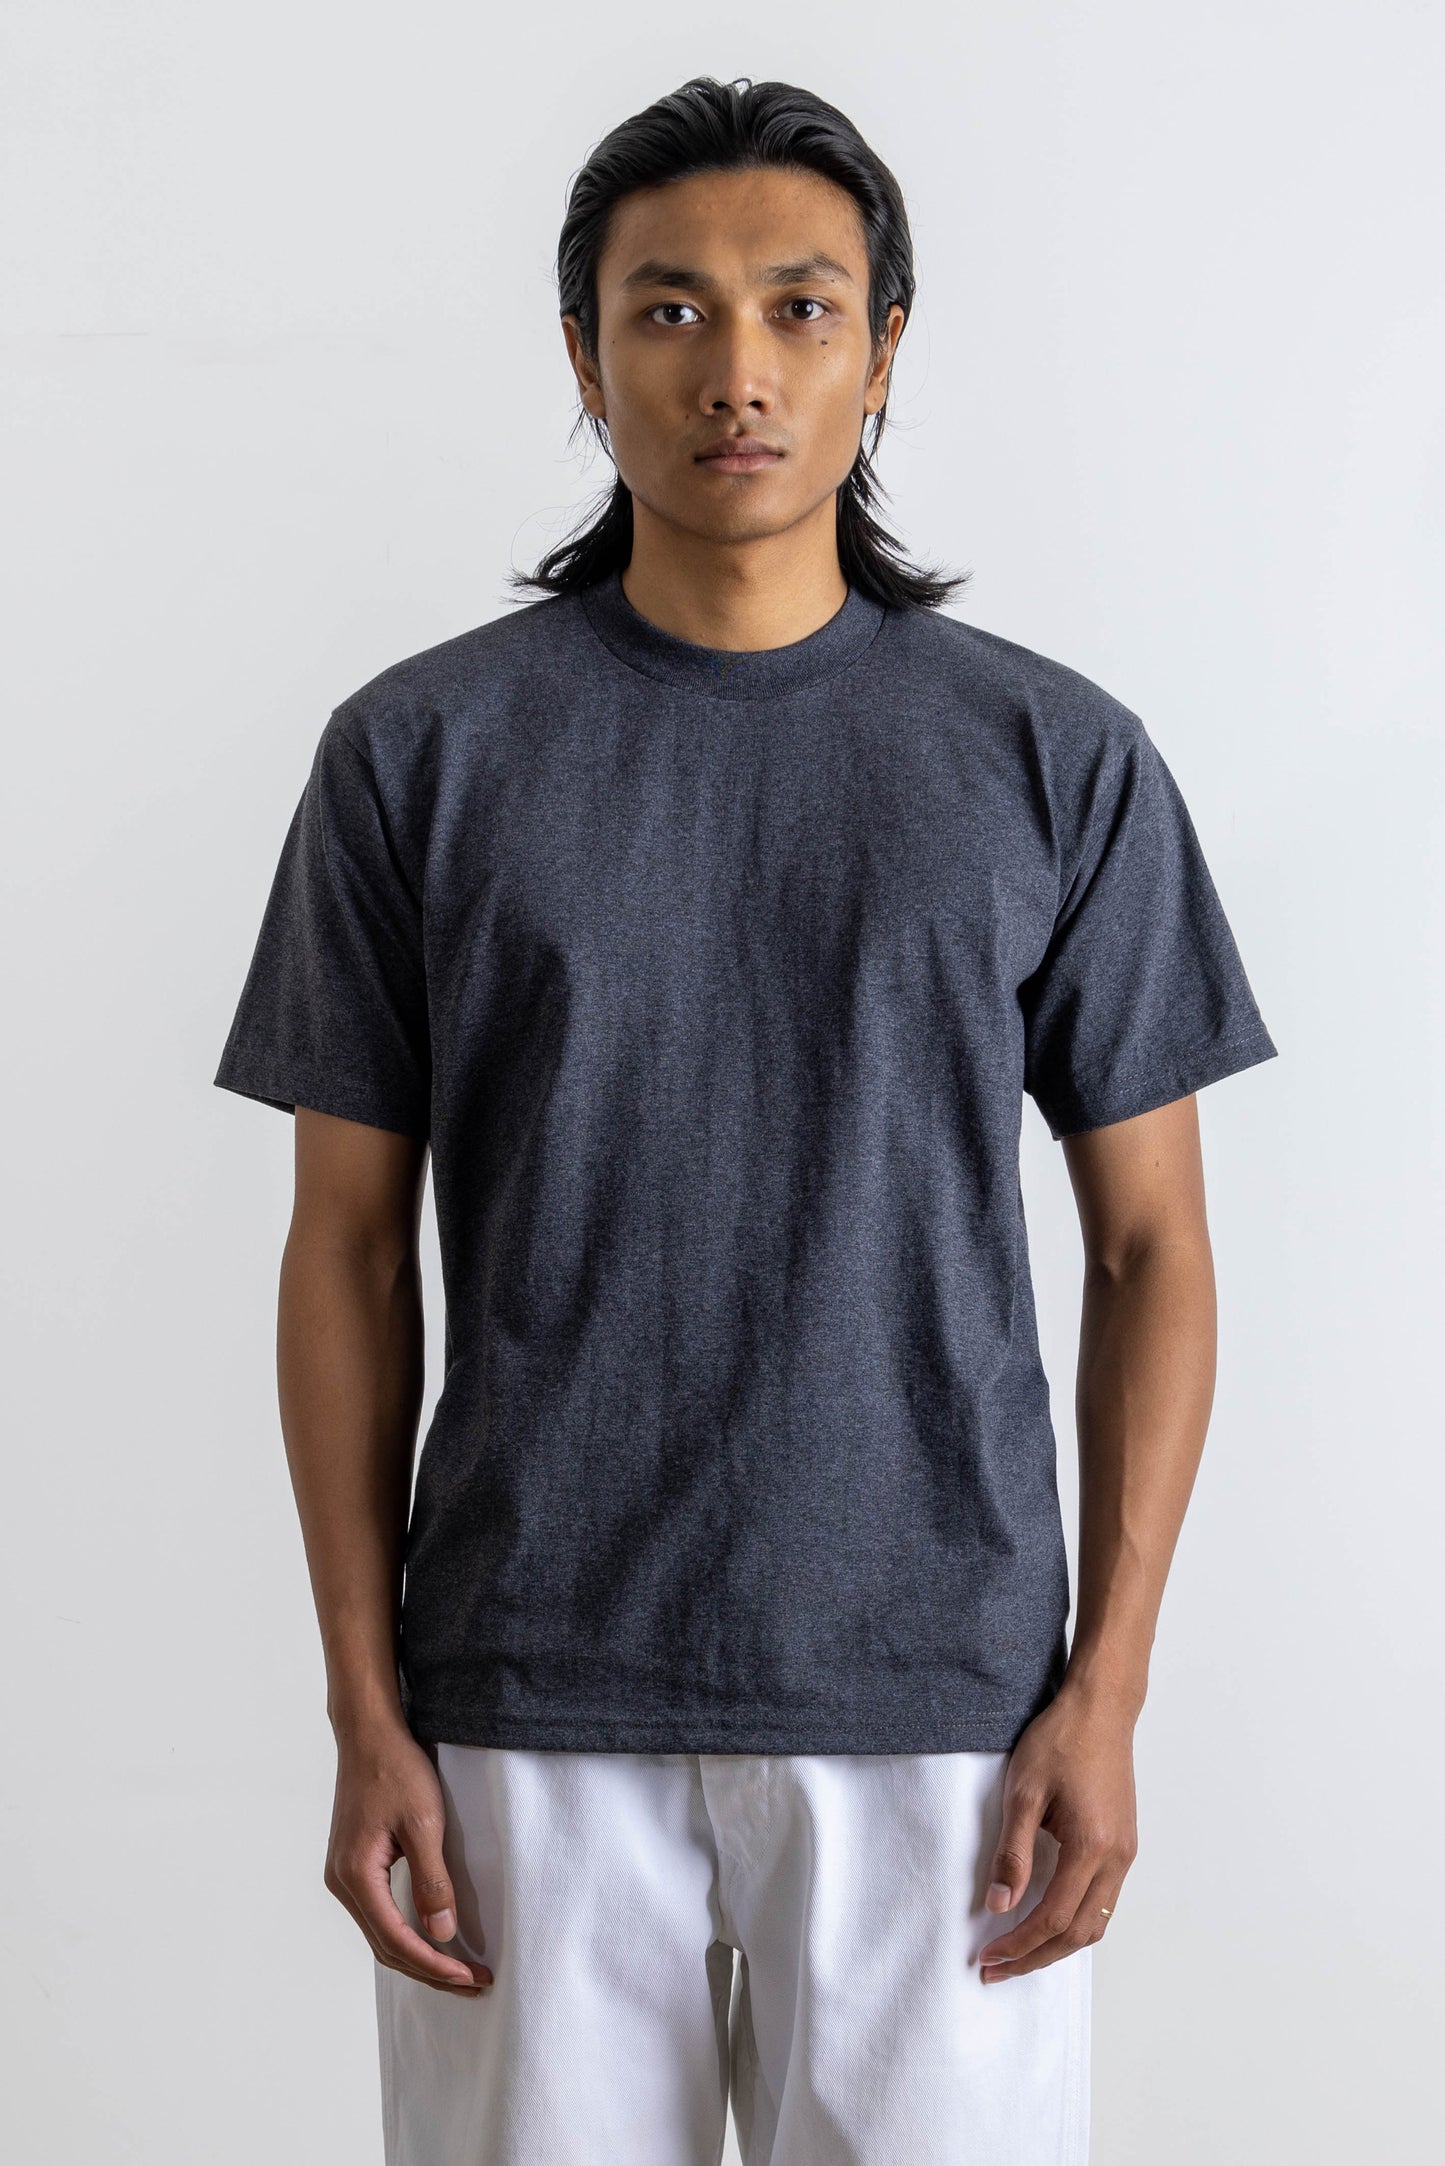 T-shirt Heavyweight Gris chiné anthracite